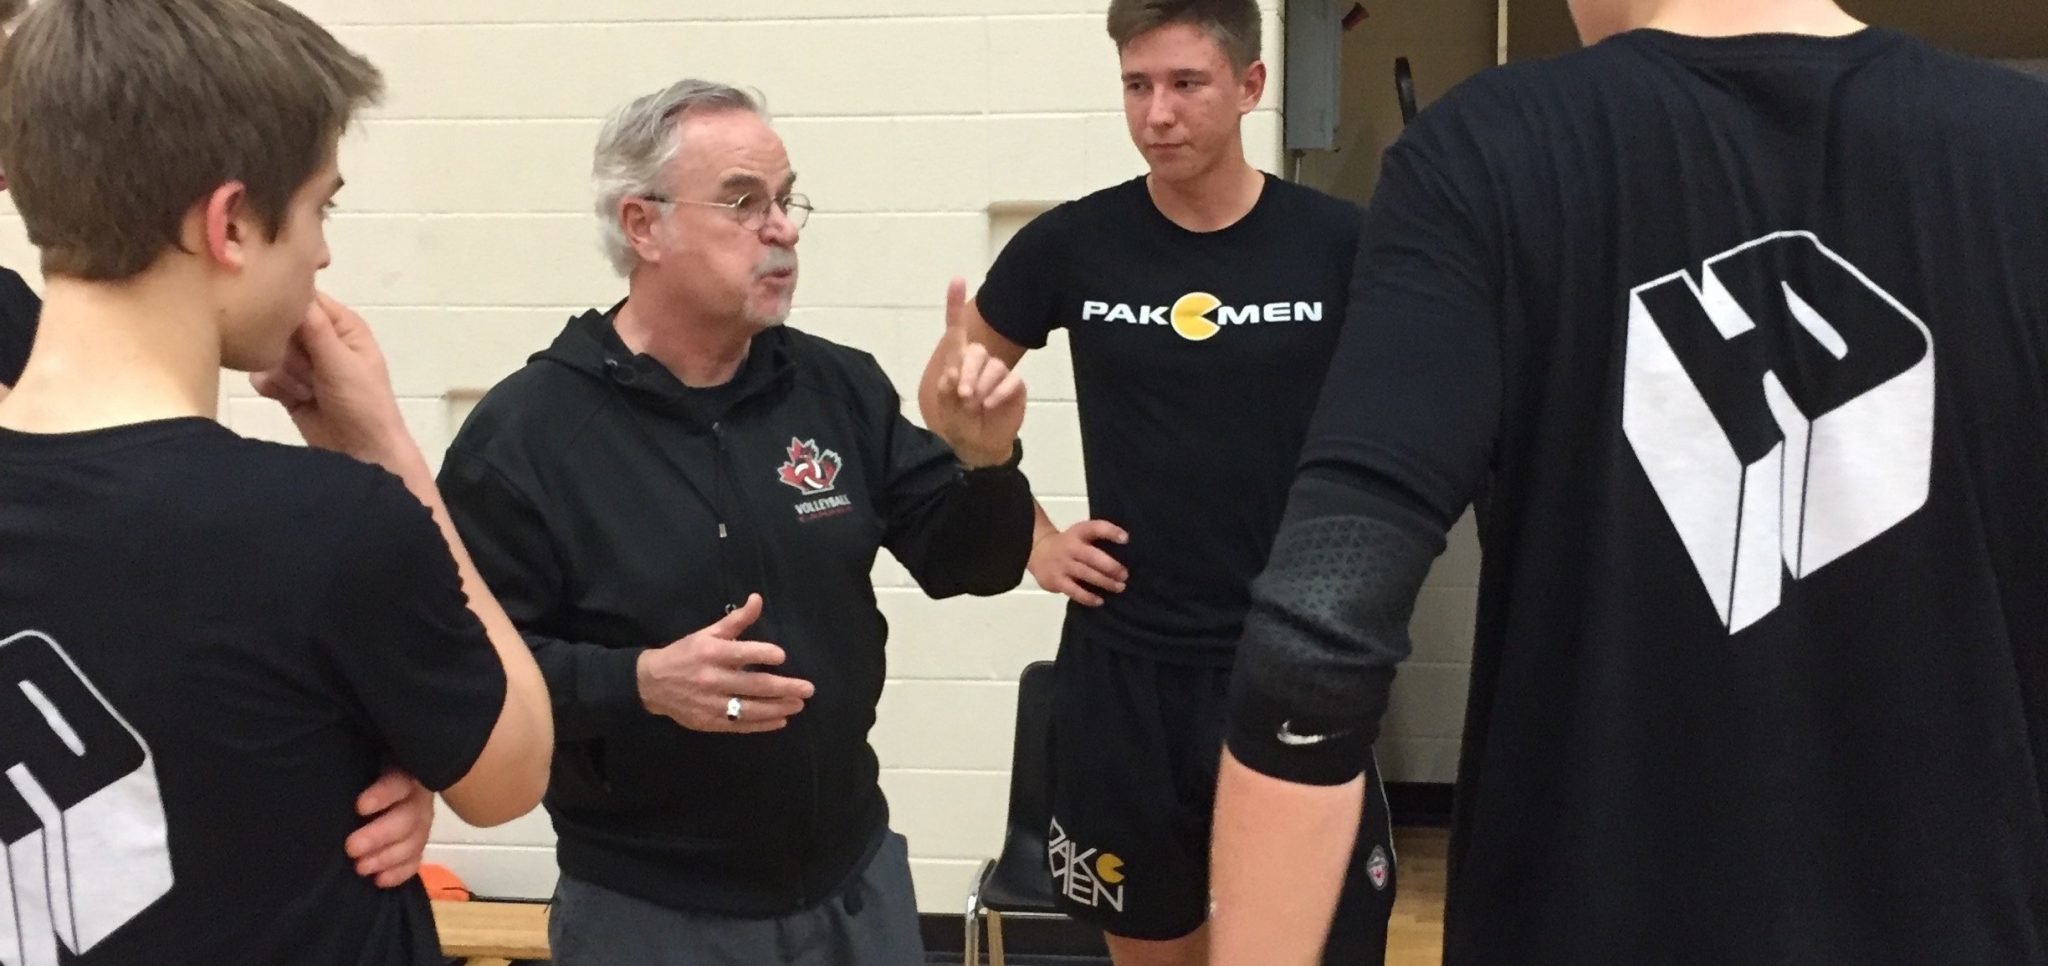 Long-time University of Toronto head coach and current Pakmen Volleyball club Head Coach Orest Stanko